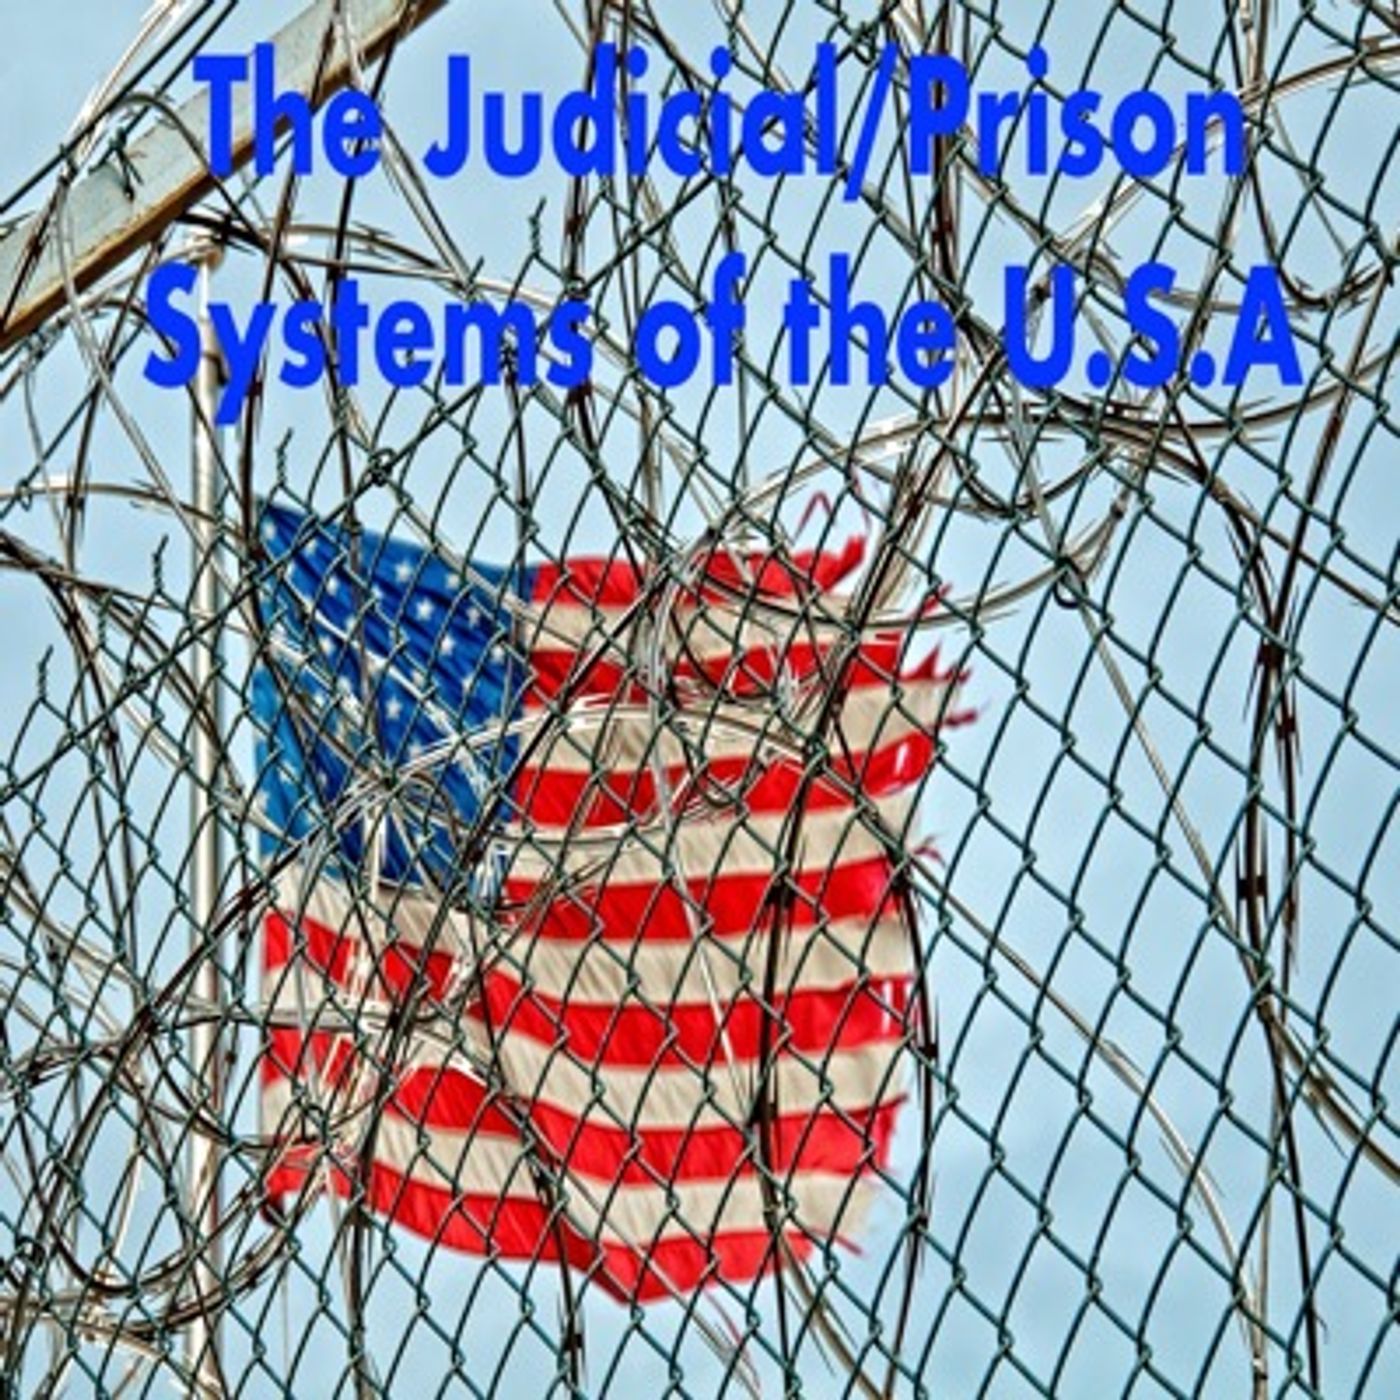 Episode 18 - The Judicial-Prison Systems in the USA